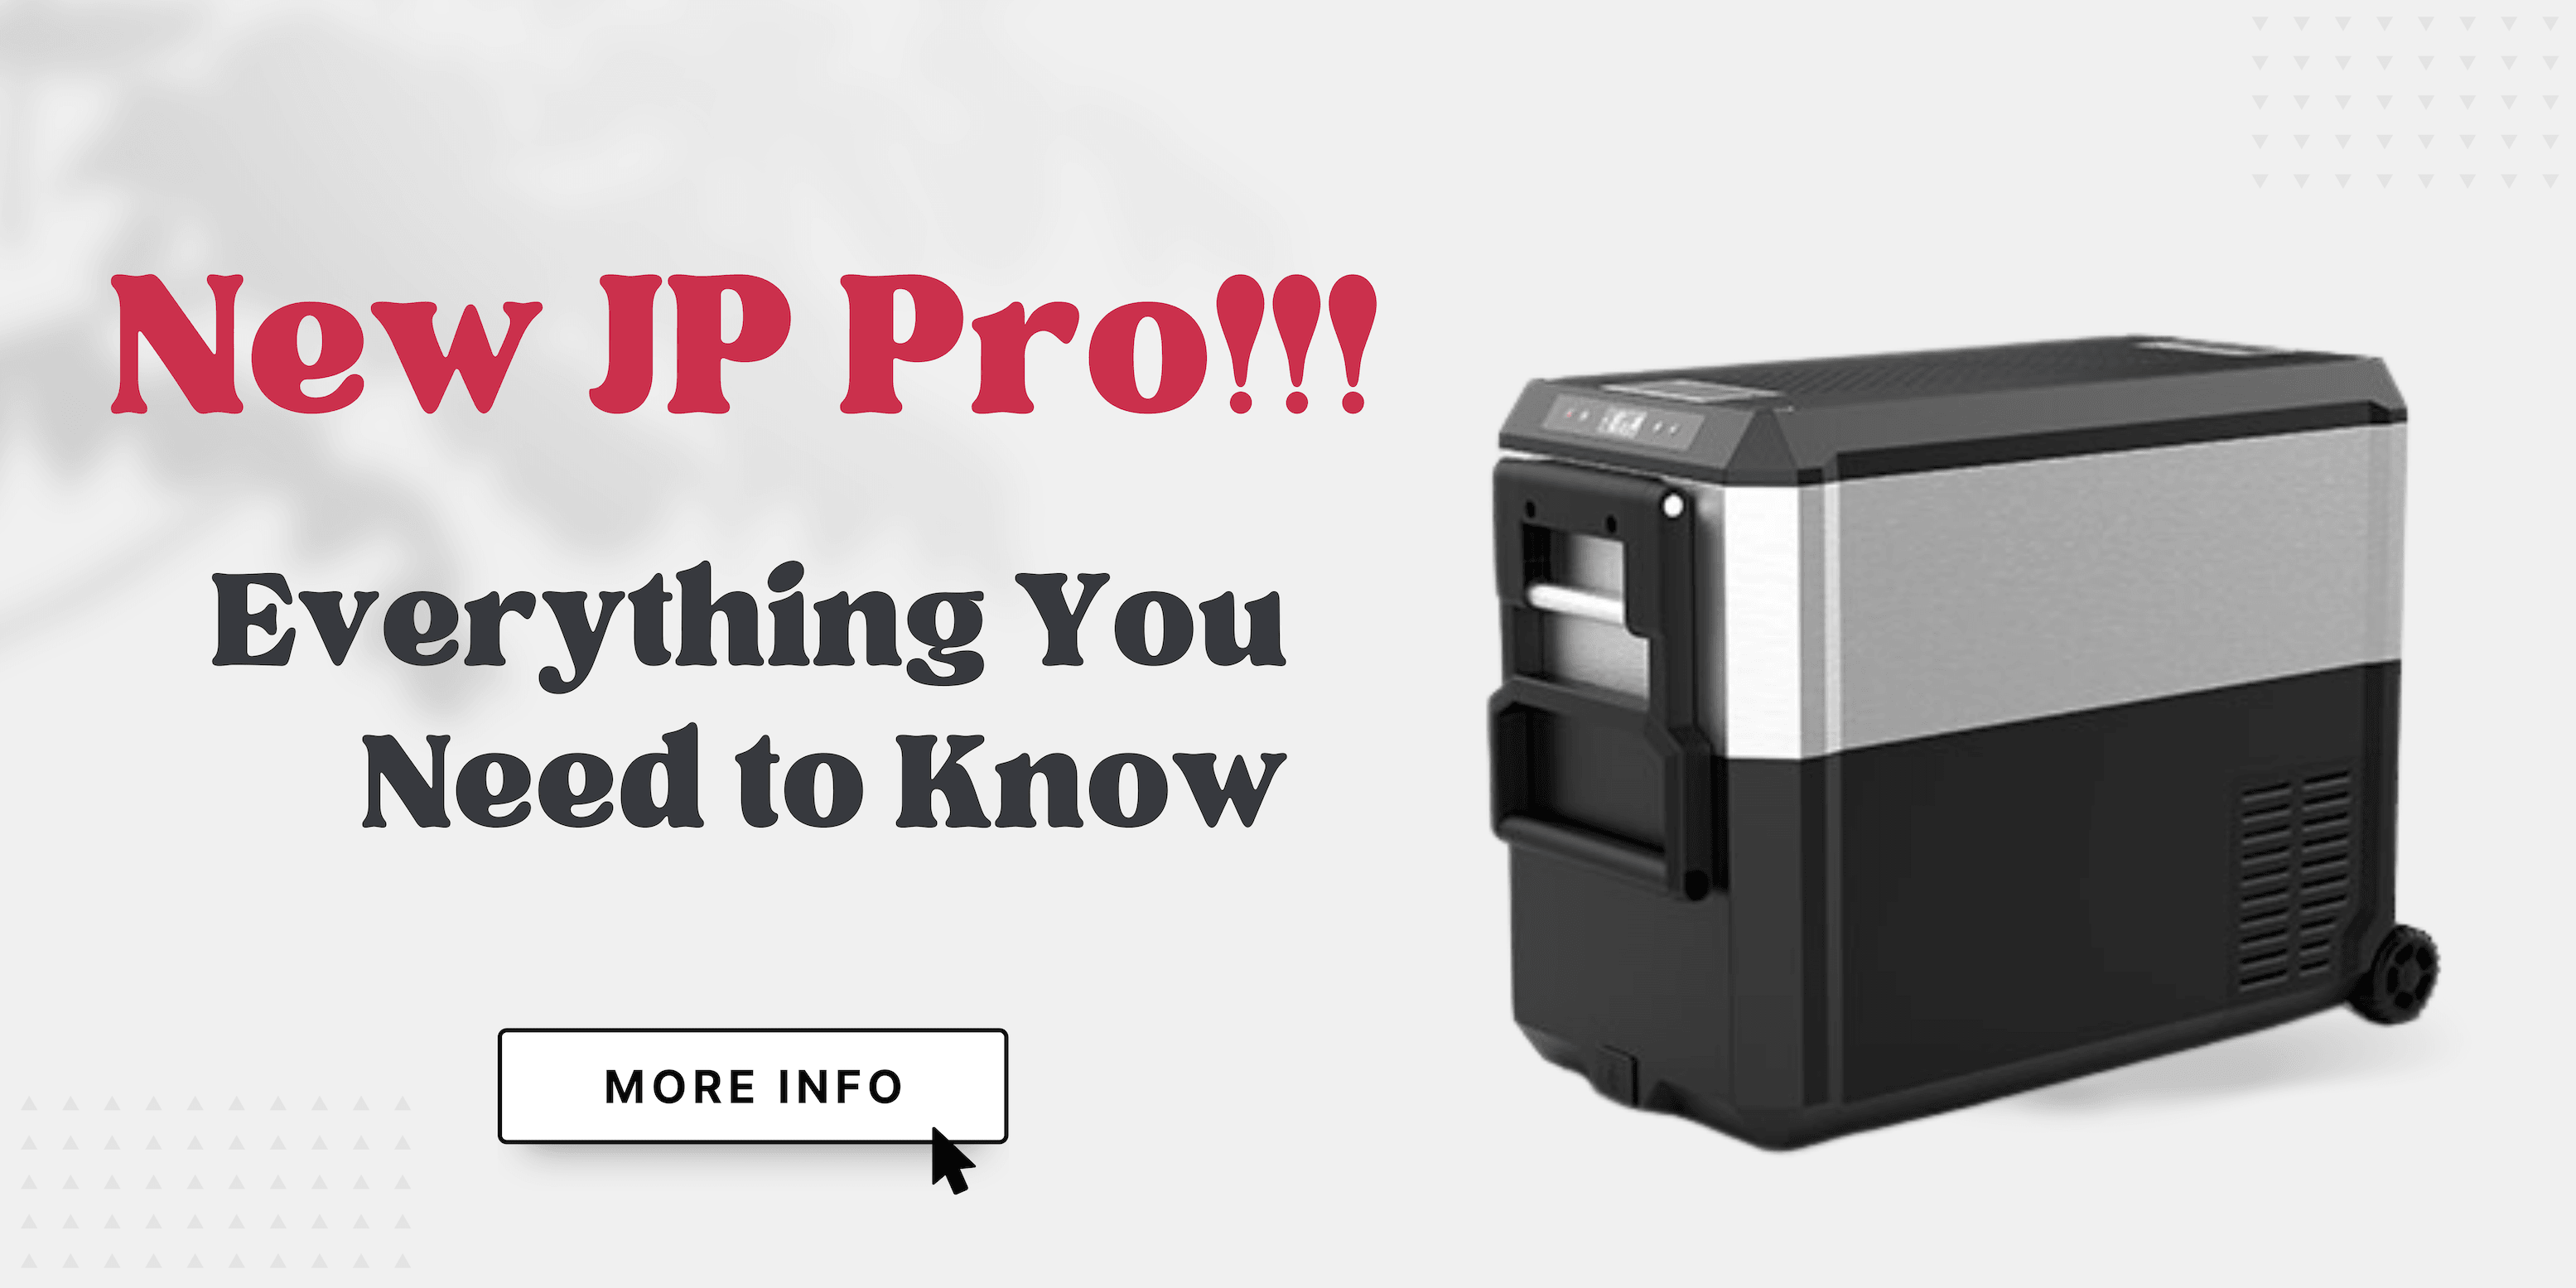 Introducing the New JP Pro + Everything You Need to Know - www.icecofreezer.com